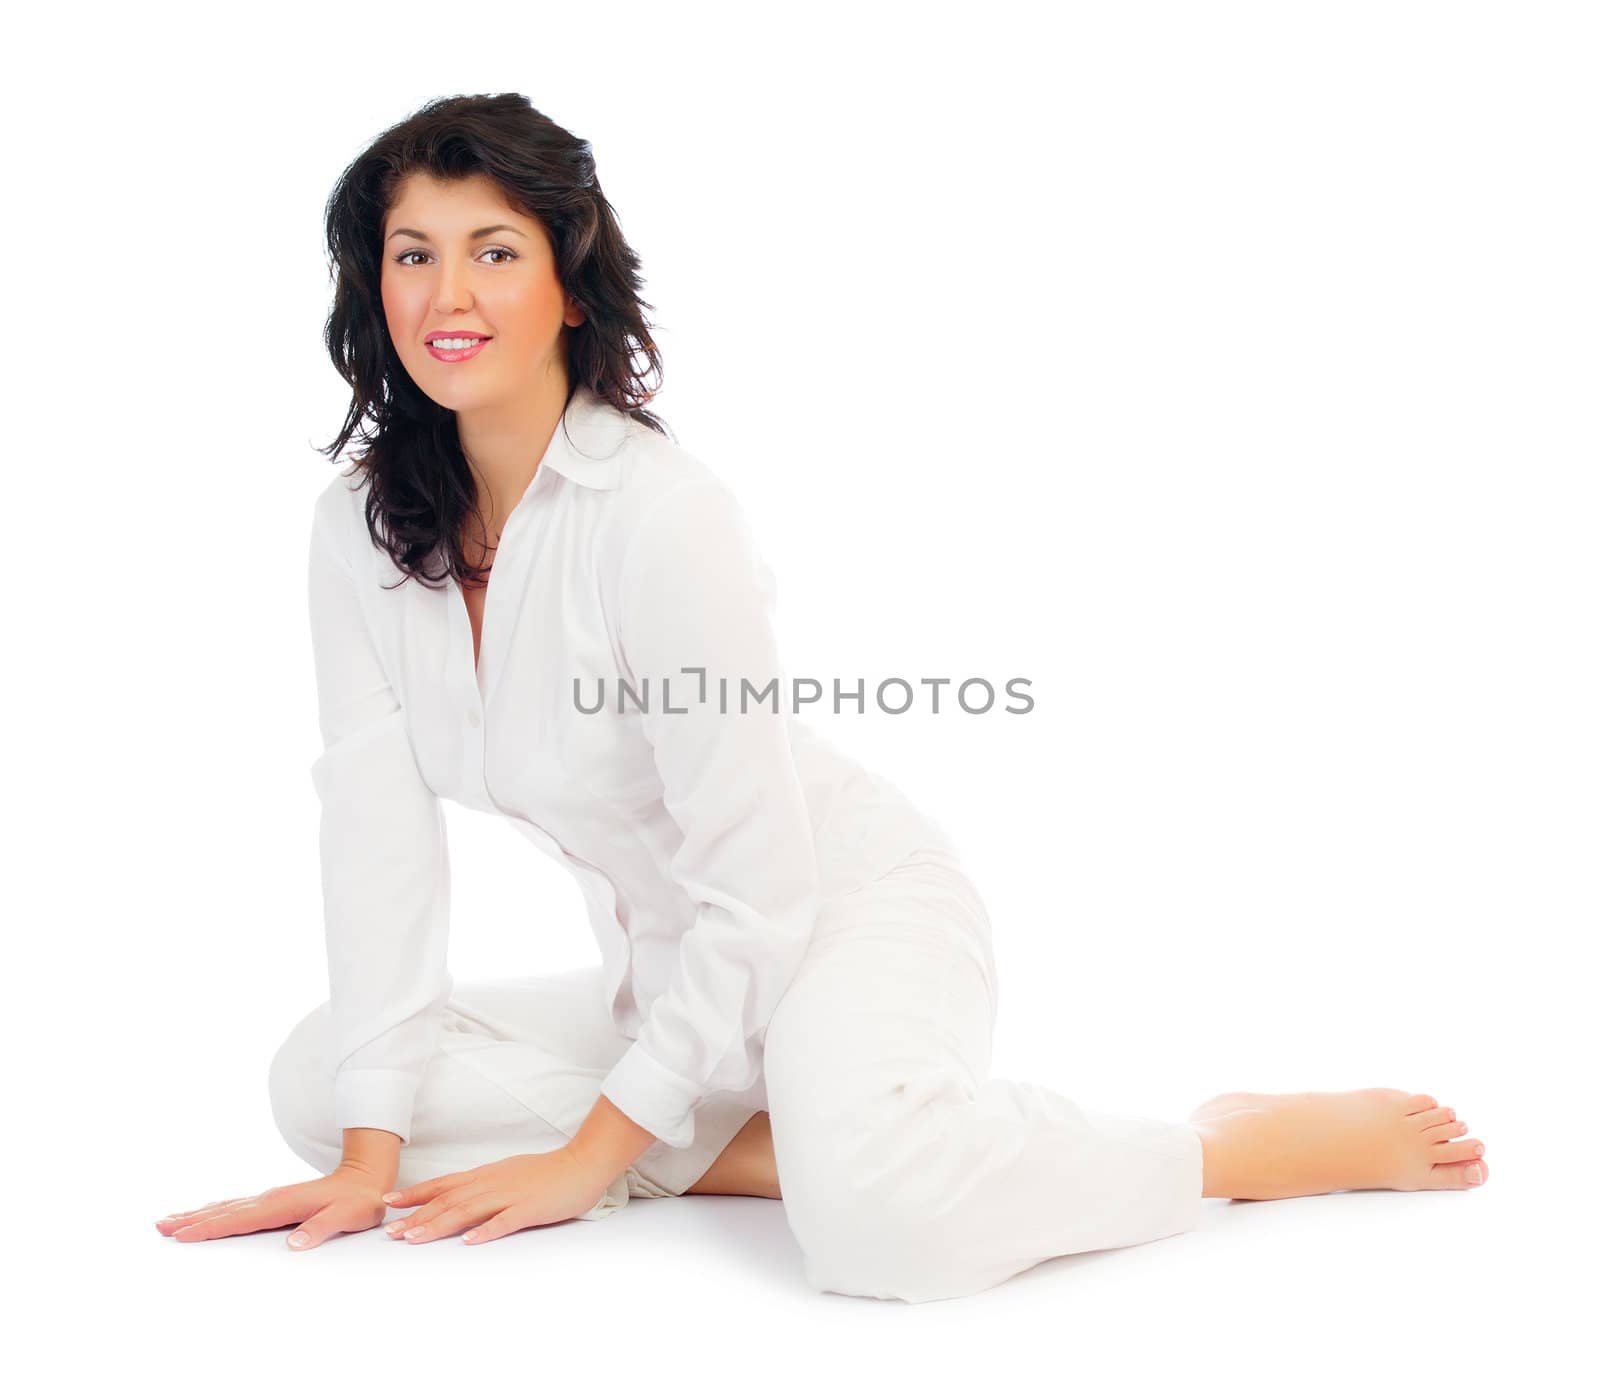 Young smiling woman sitting on floor by rbv